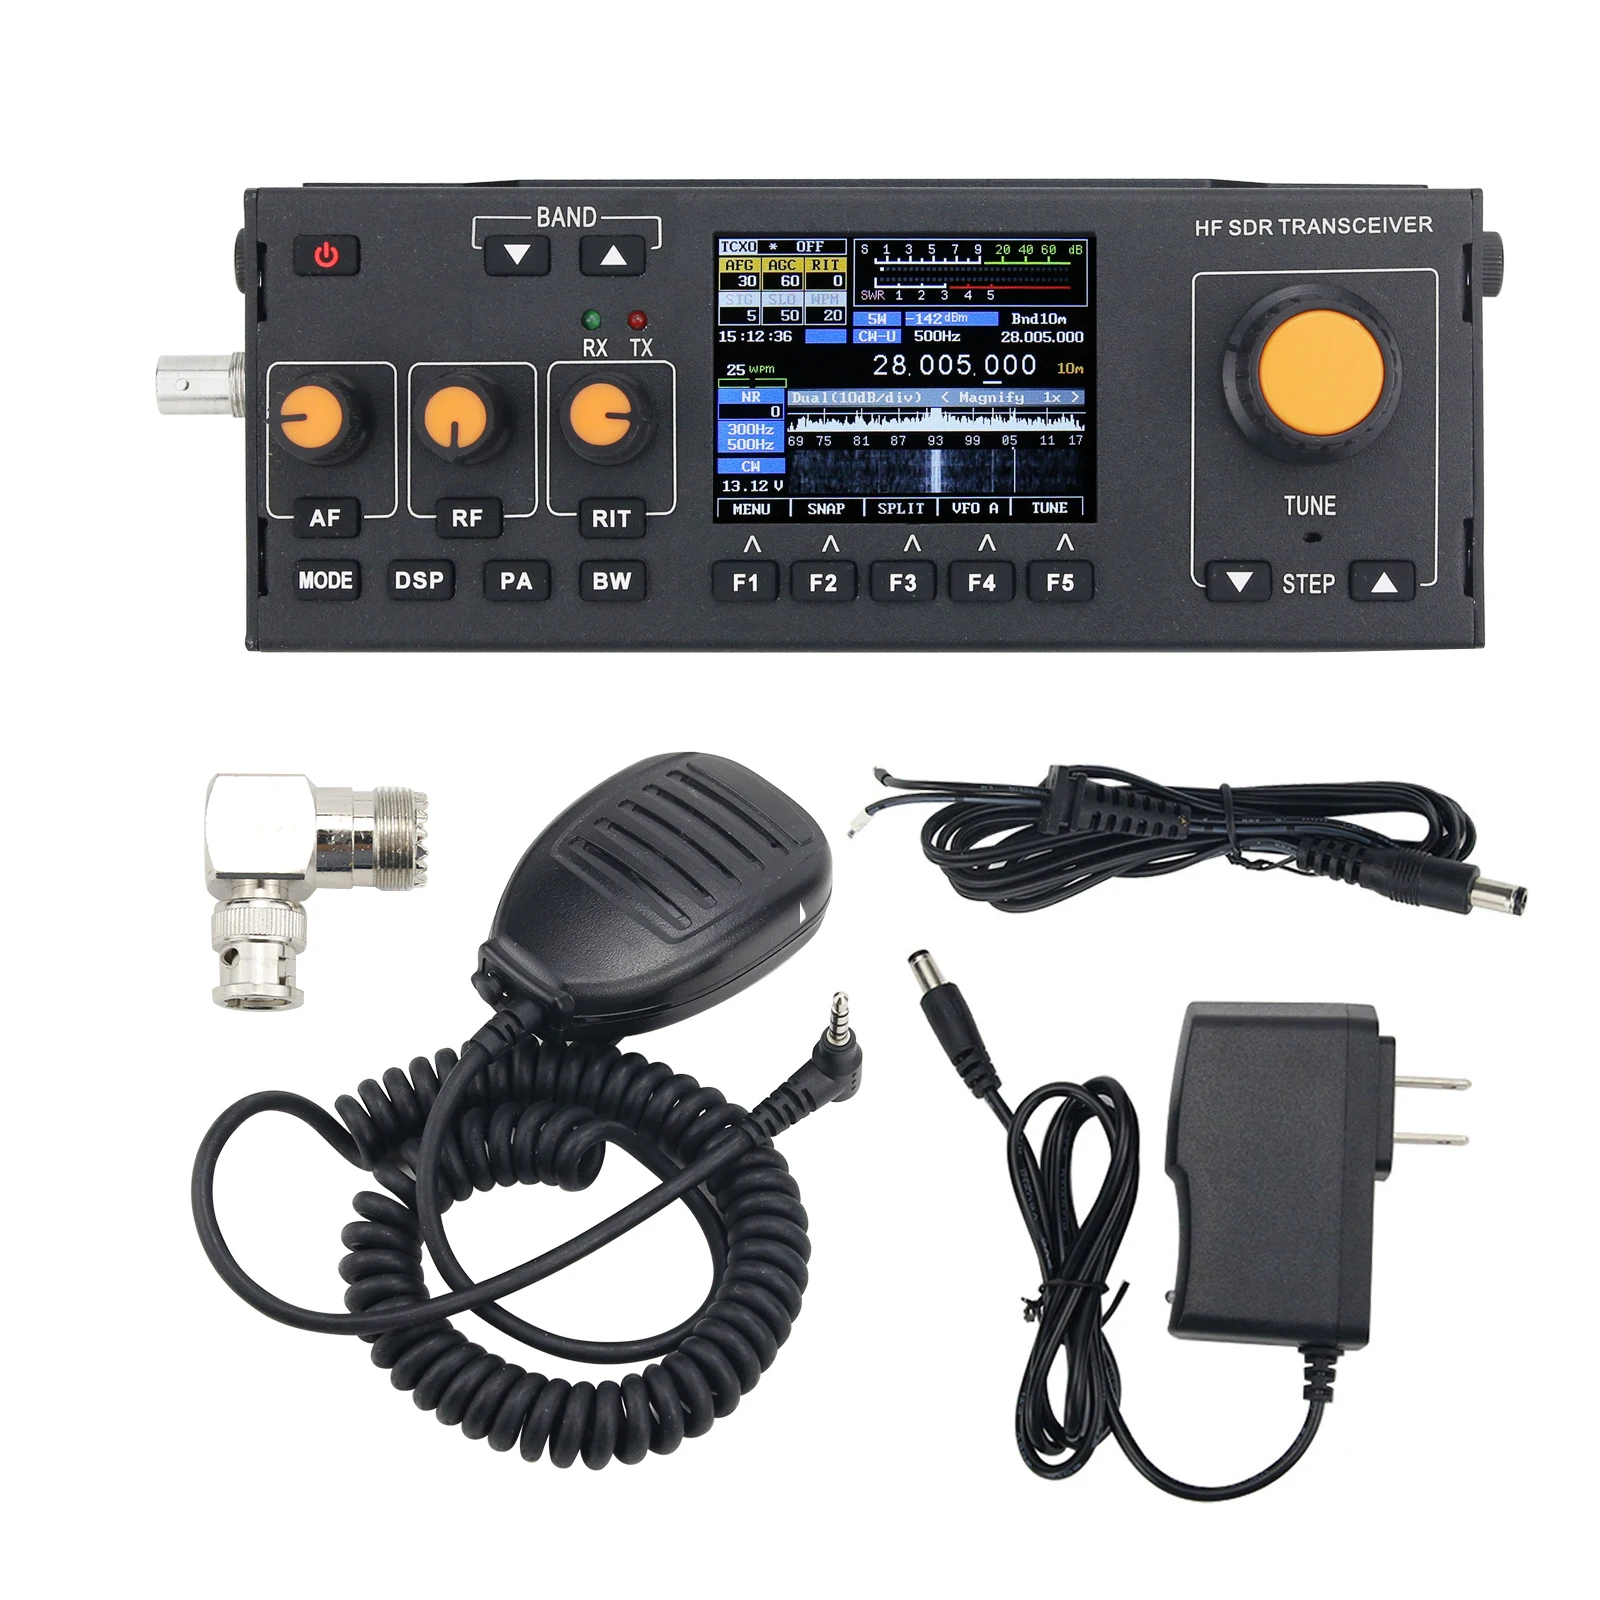 Wholesale RS-918 15W HF SDR Transceiver MCHF-QRP Transceiver Amateur Shortwave Radio w/ Handheld Mic Charger From m.alibaba photo picture